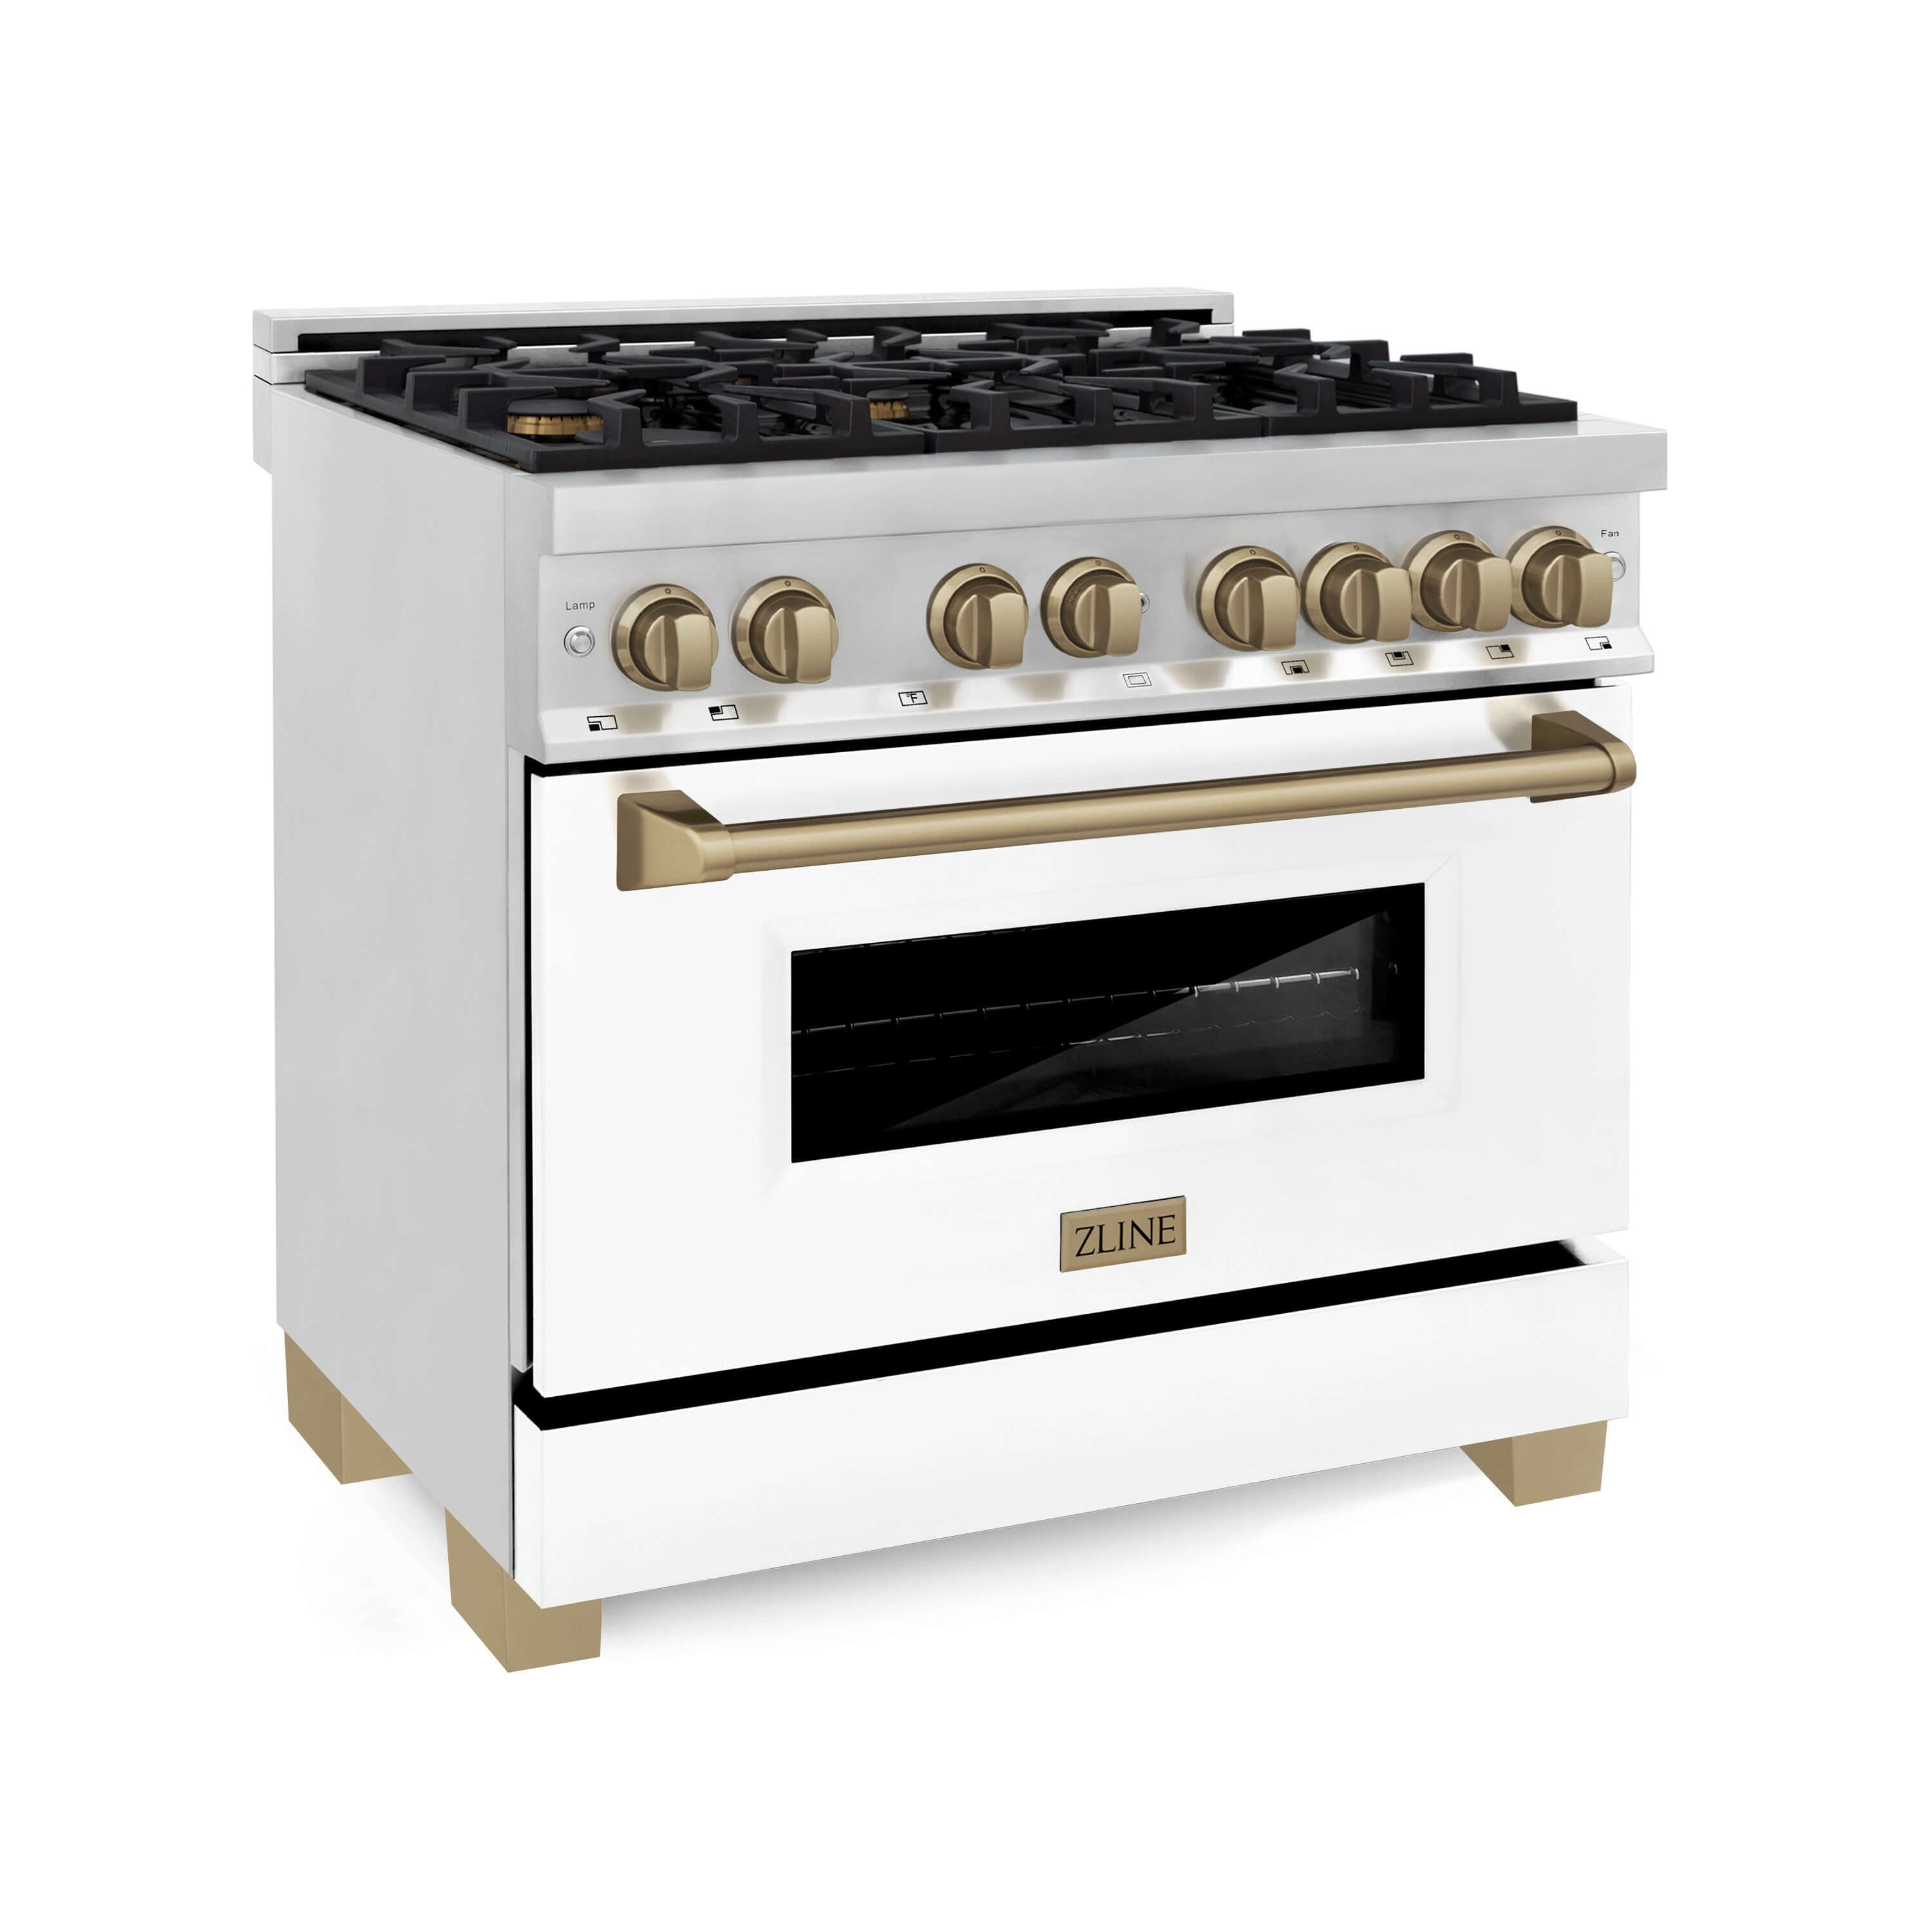 ZLINE Autograph Edition 36" Dual Fuel Range with White Matte oven door and Champagne Bronze accents.